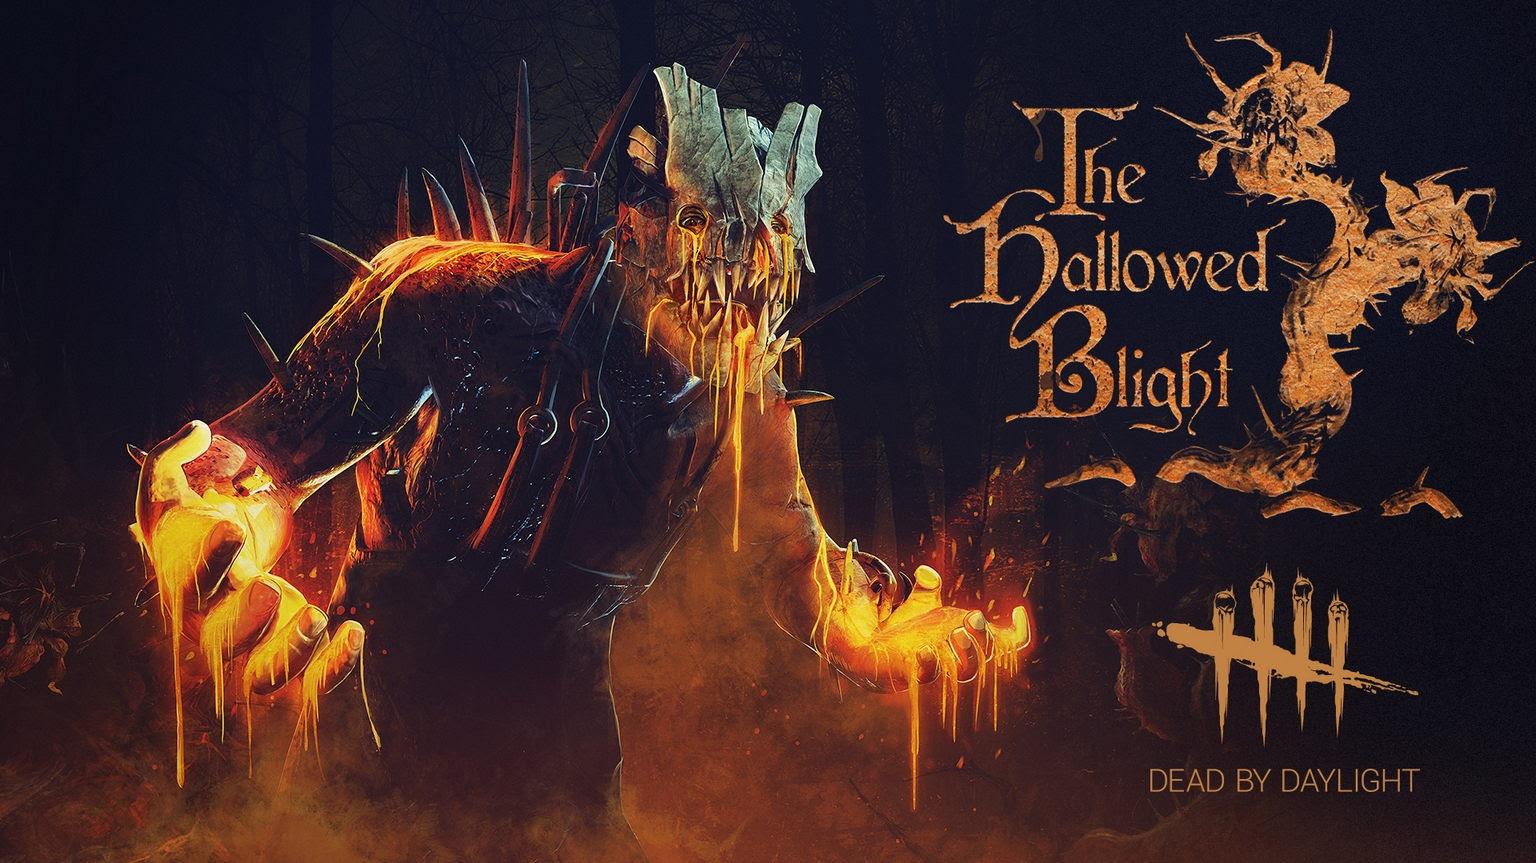 The Hallowed Blight gives players something to die for in Dead by